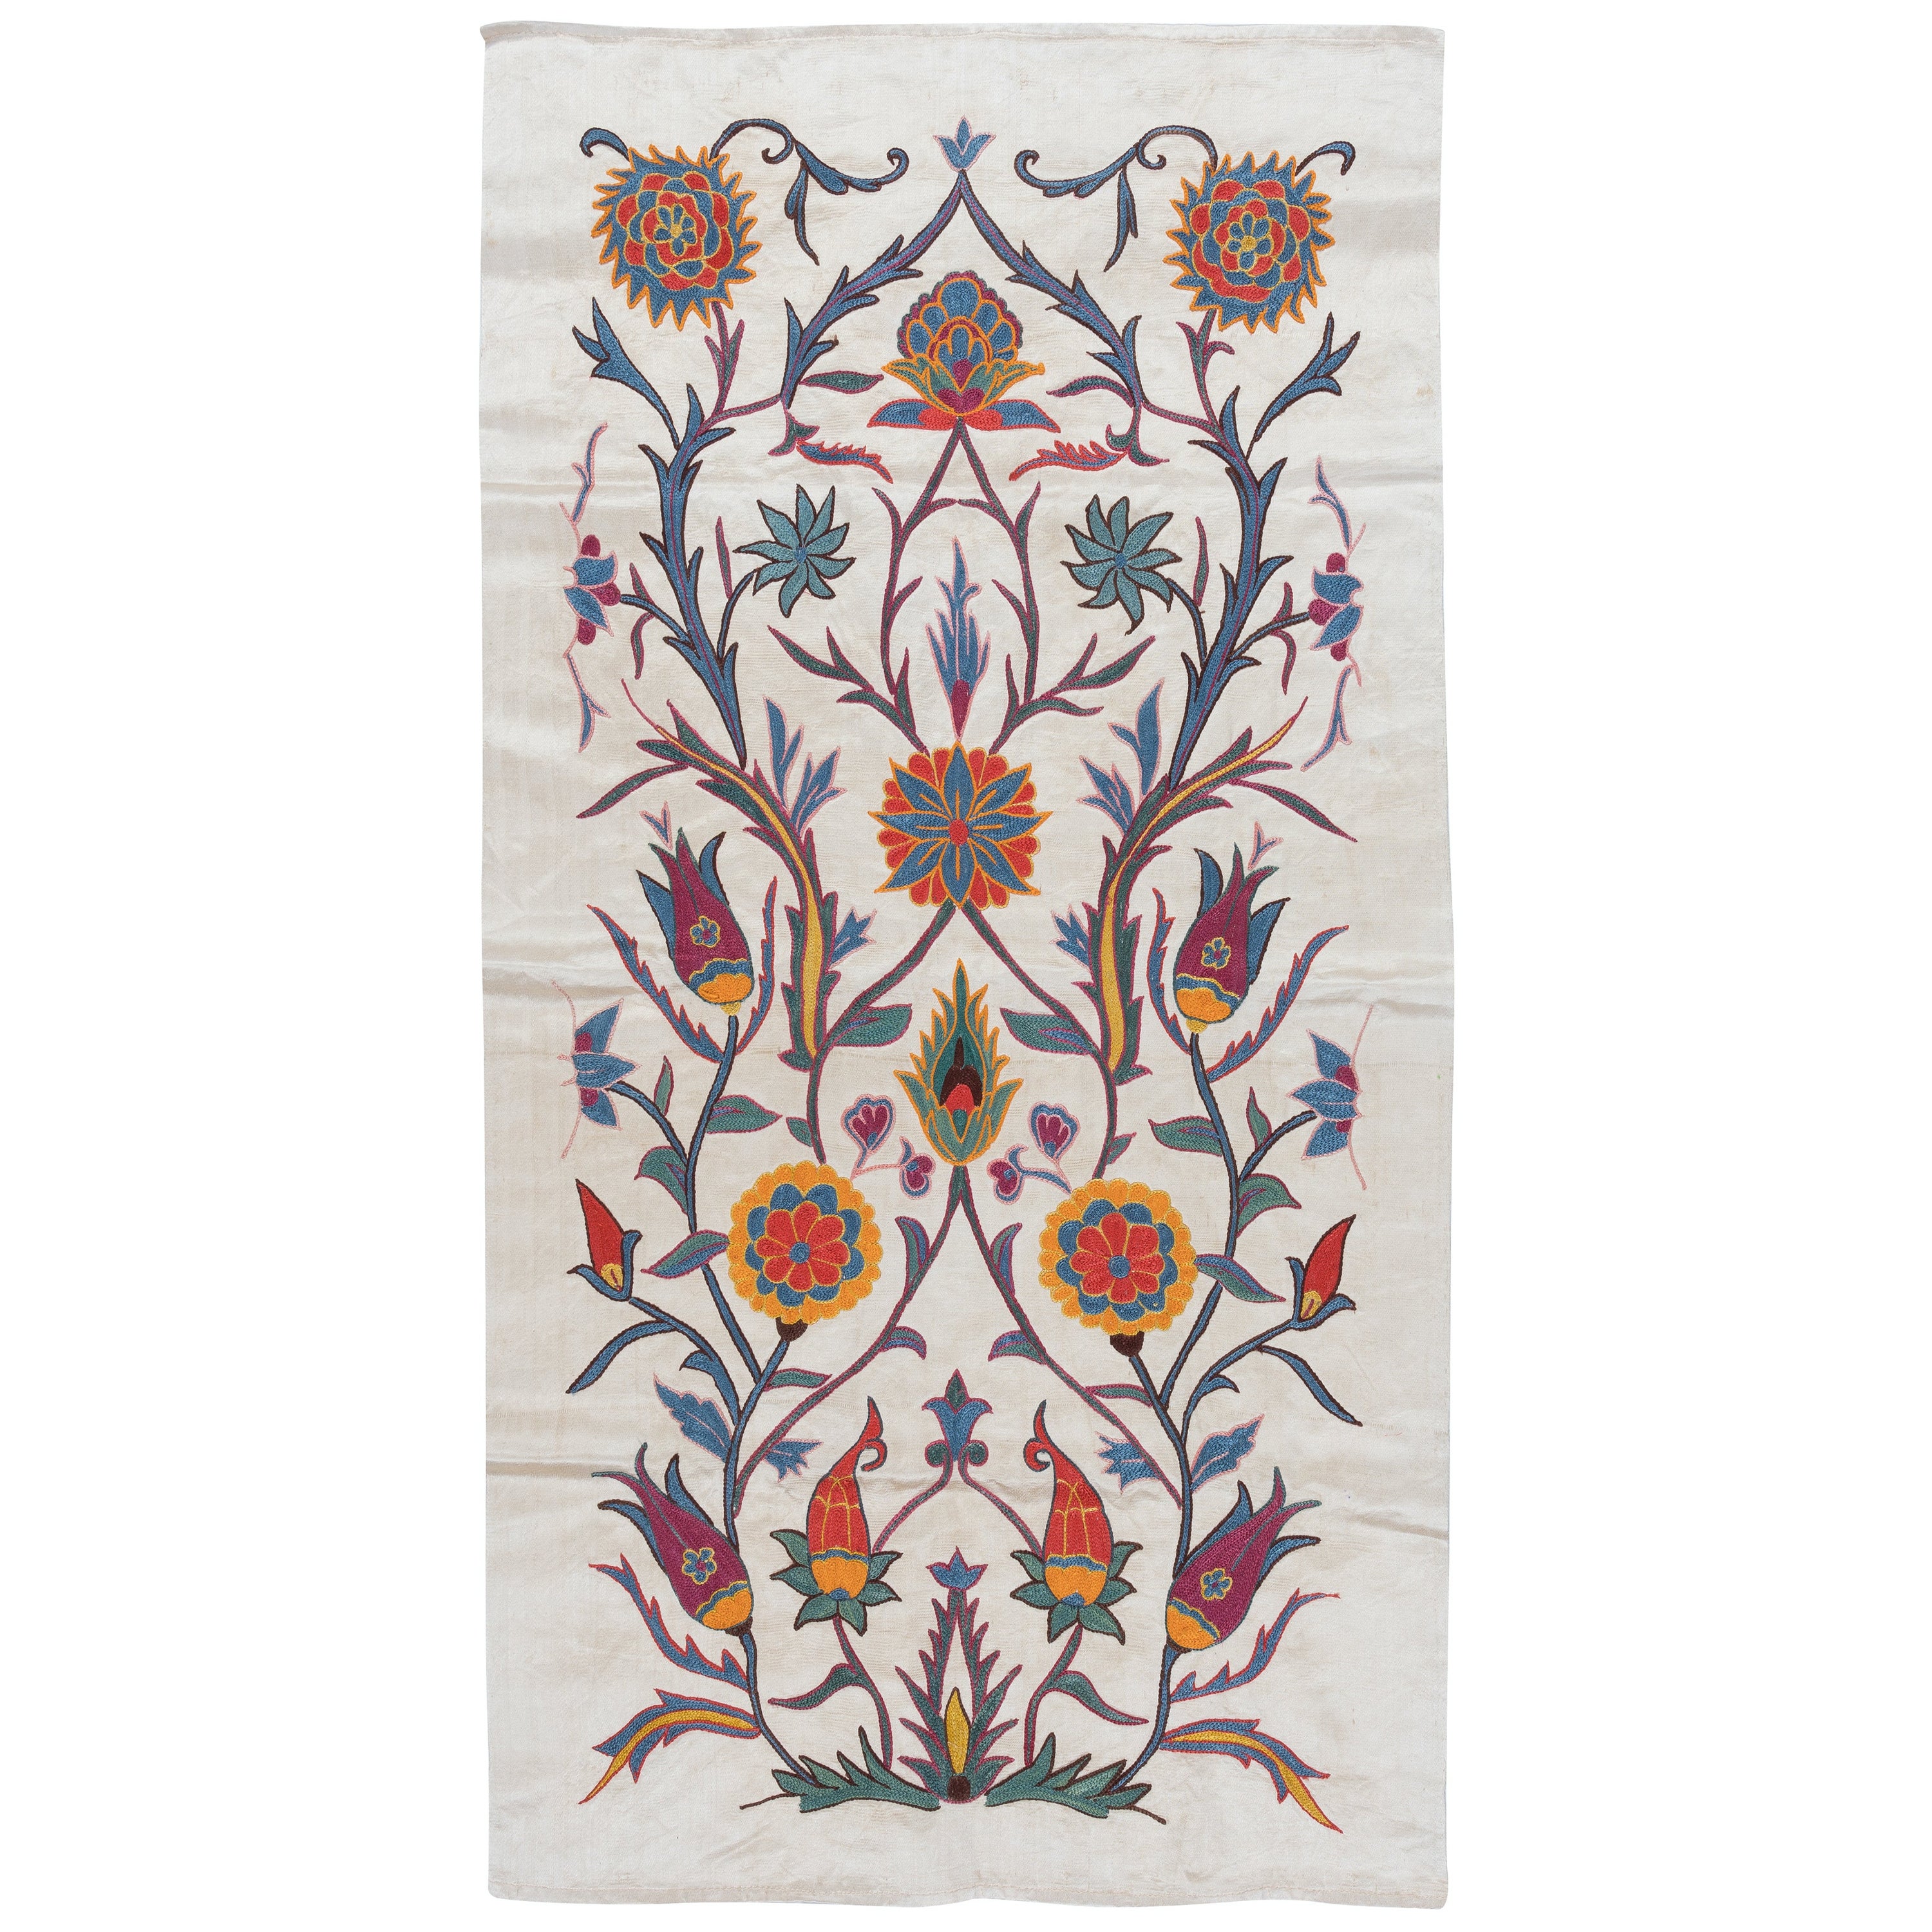 21"x41" 100% Silk Wall Hanging with Floral Design, Embroidered Uzbek Tapestry For Sale